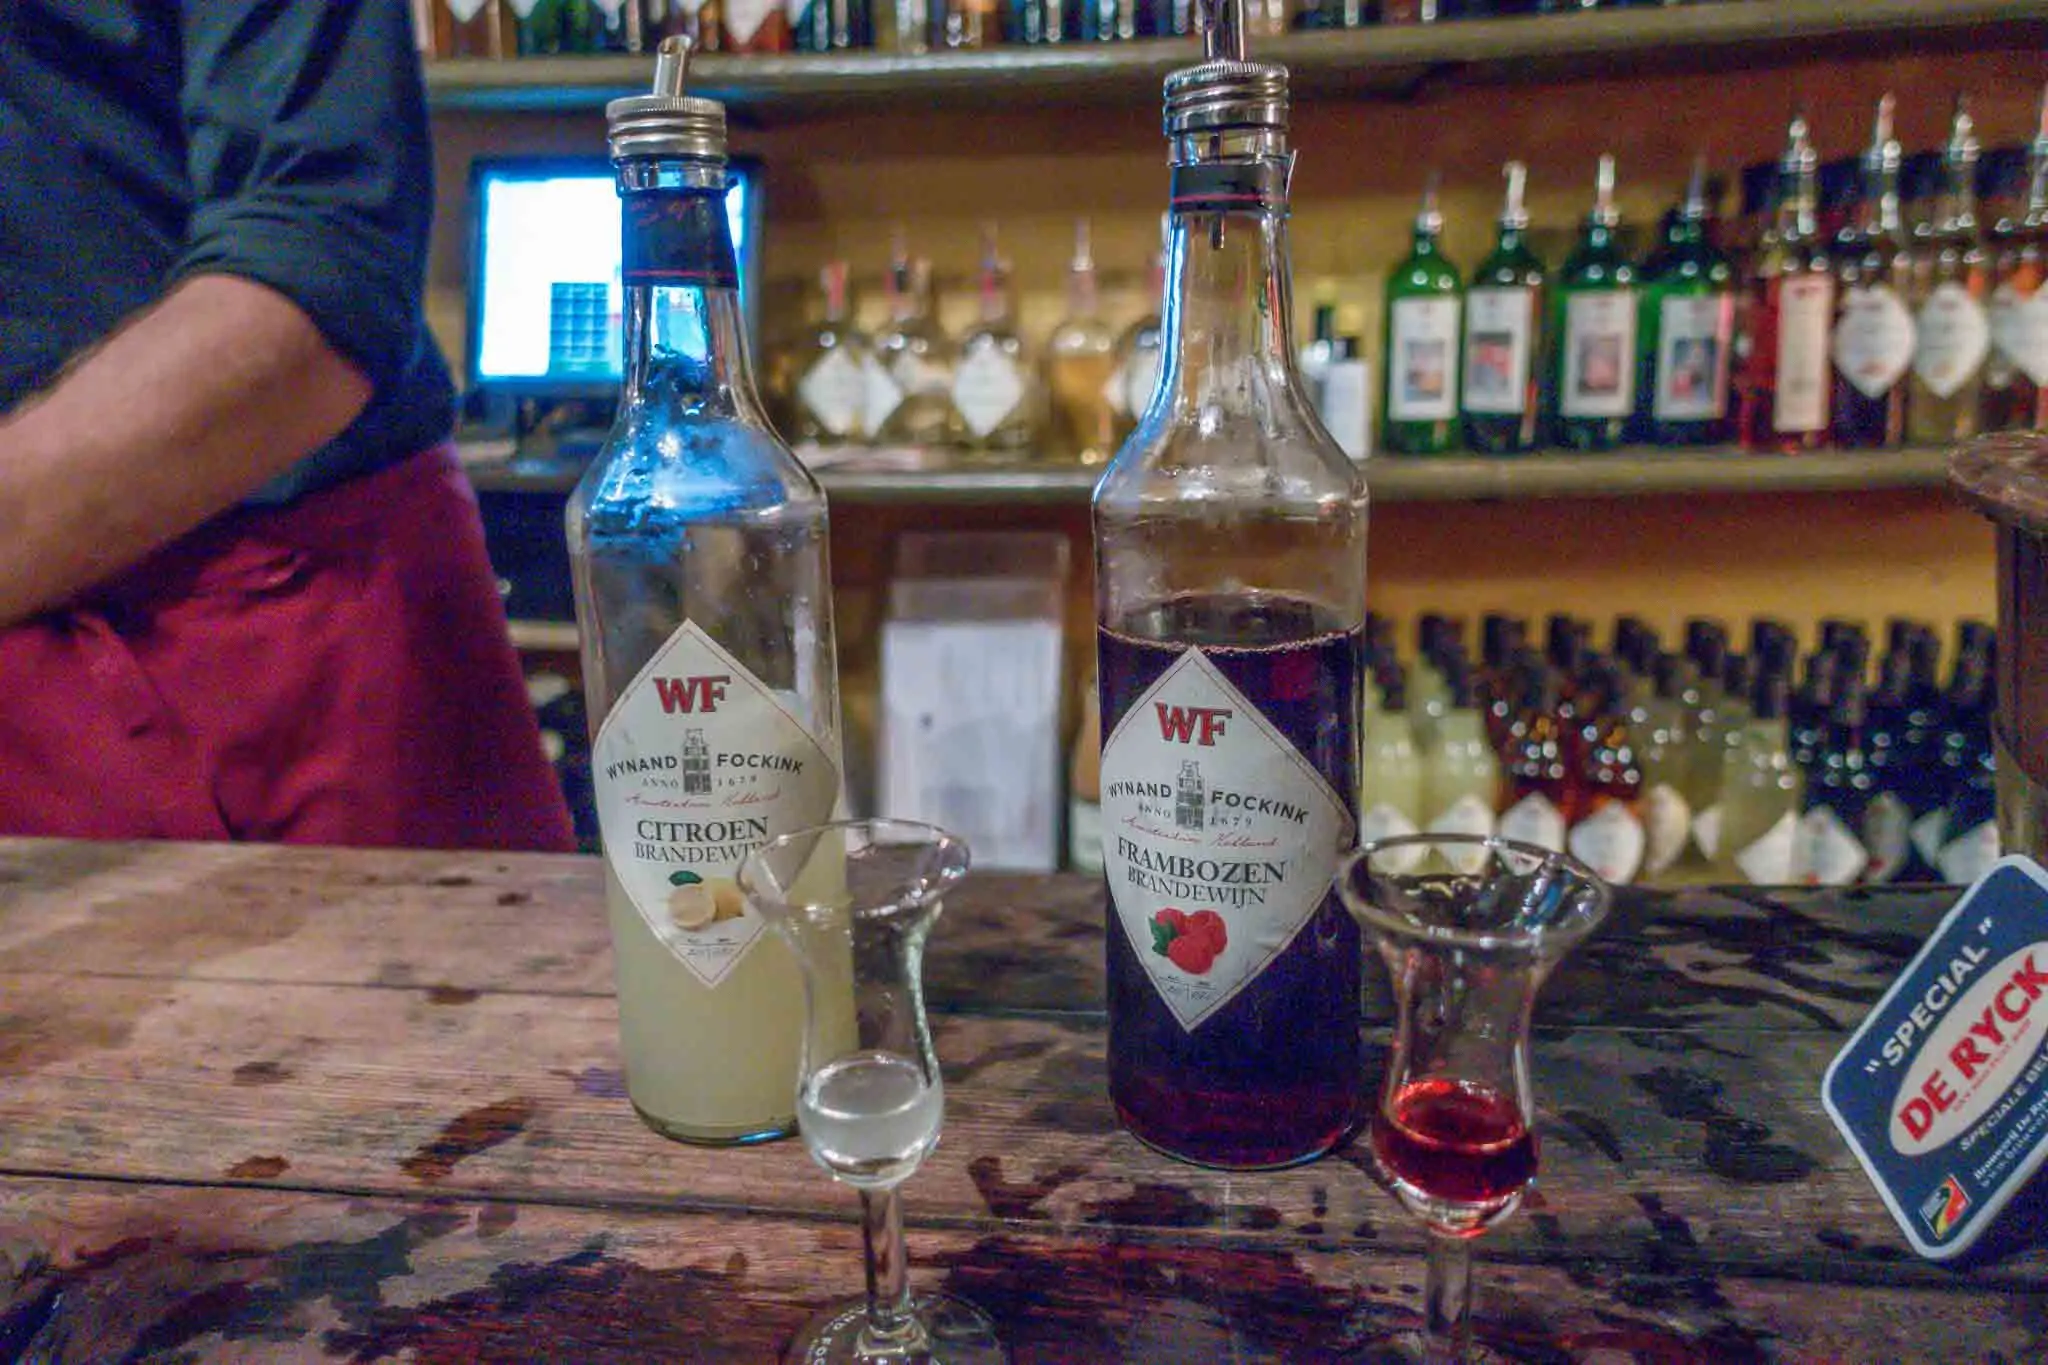 Bottles and glasses of fruit brandy on a bar.